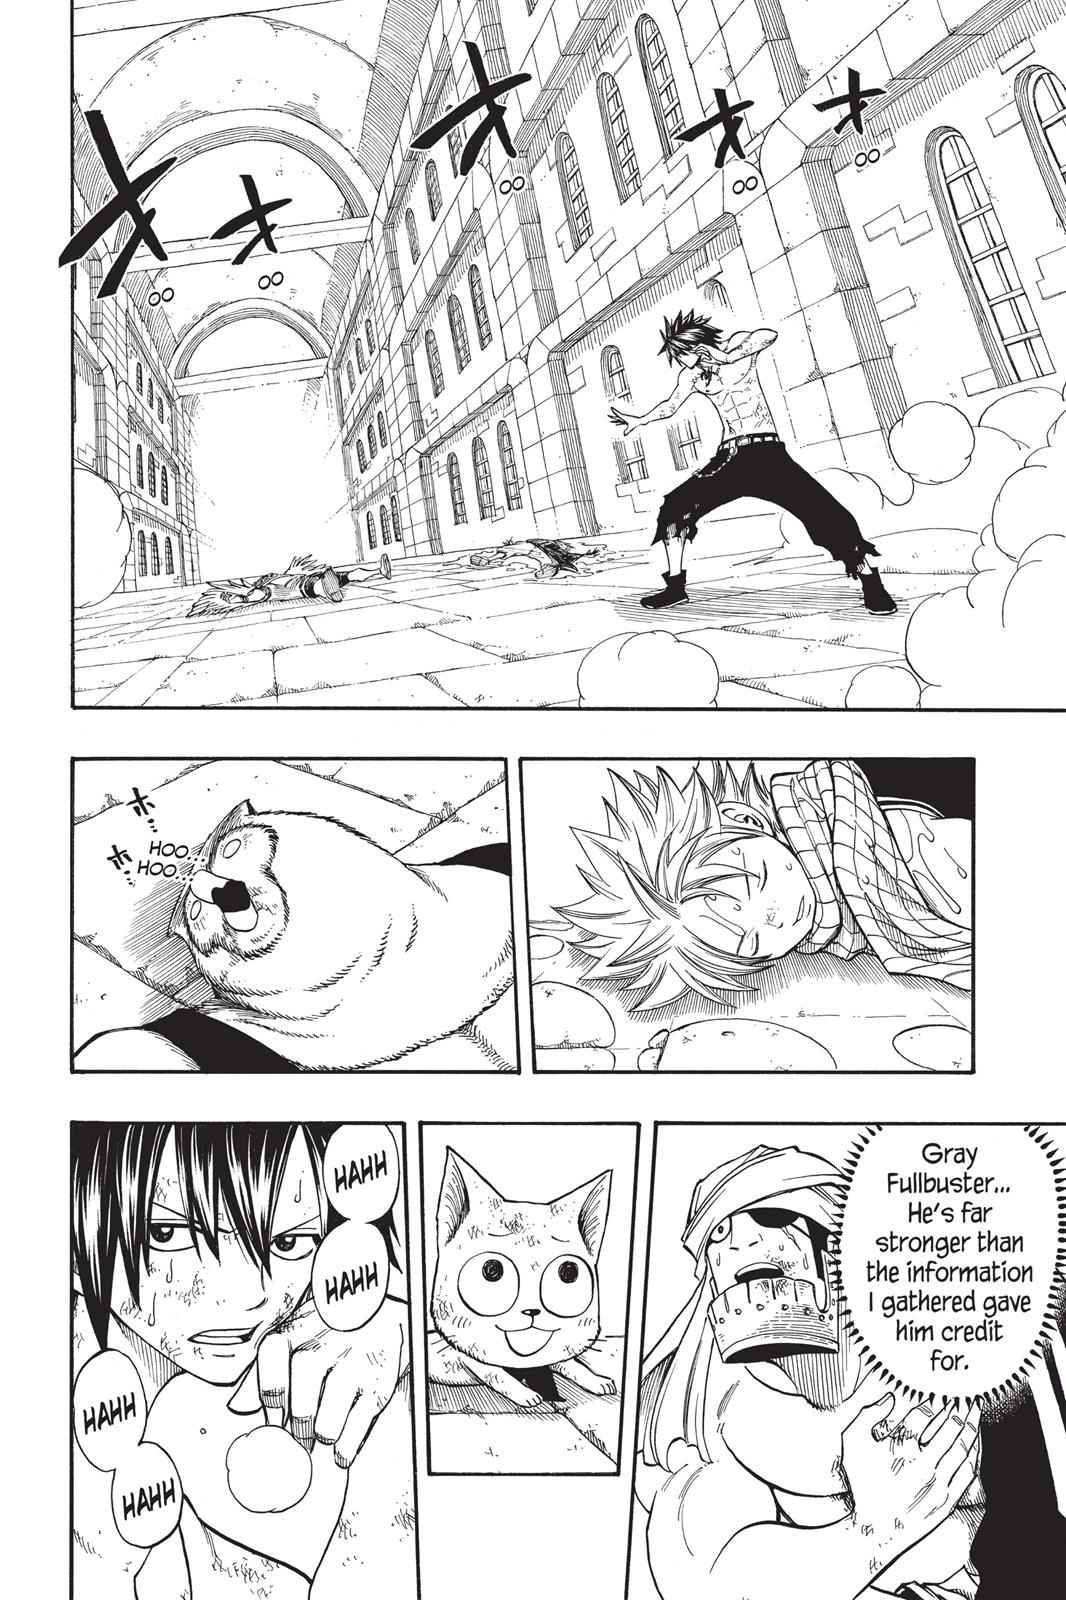  Chapter 90 image 002